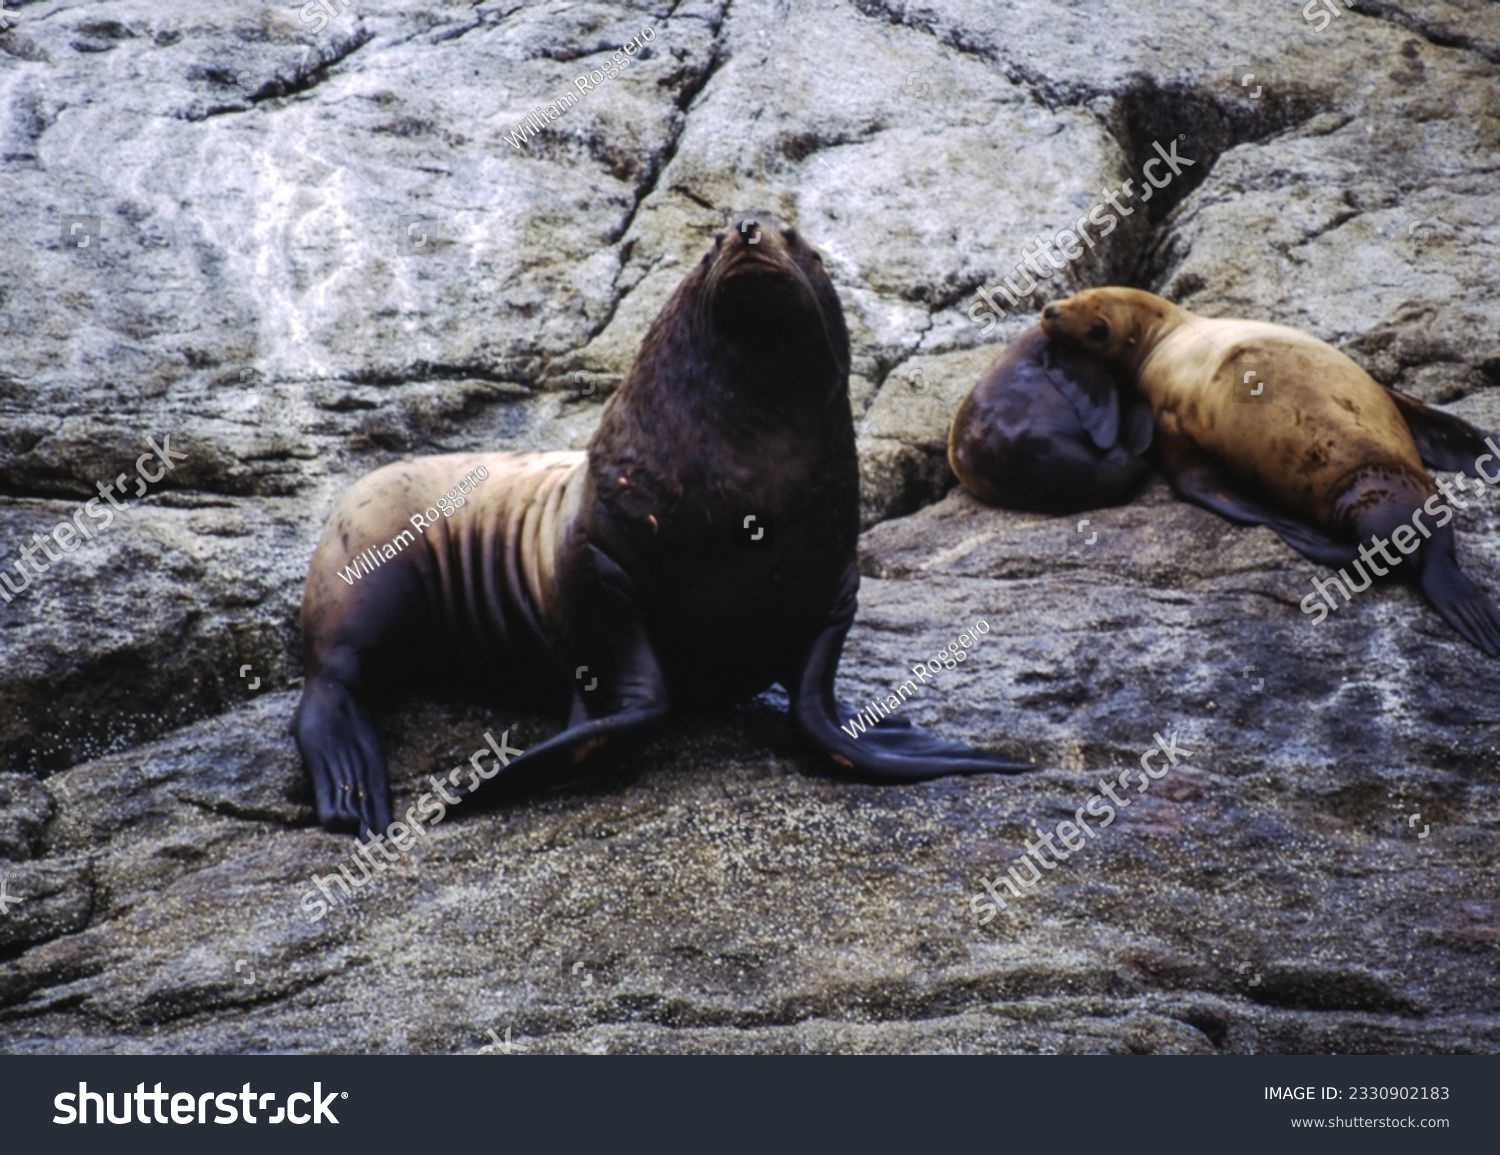 Northern fur seals have a stocky body, small head, very short snout, and extremely dense fur that ends at the wrist lines of their flippers. Their hind flippers can be up to one-fourth body length. #2330902183